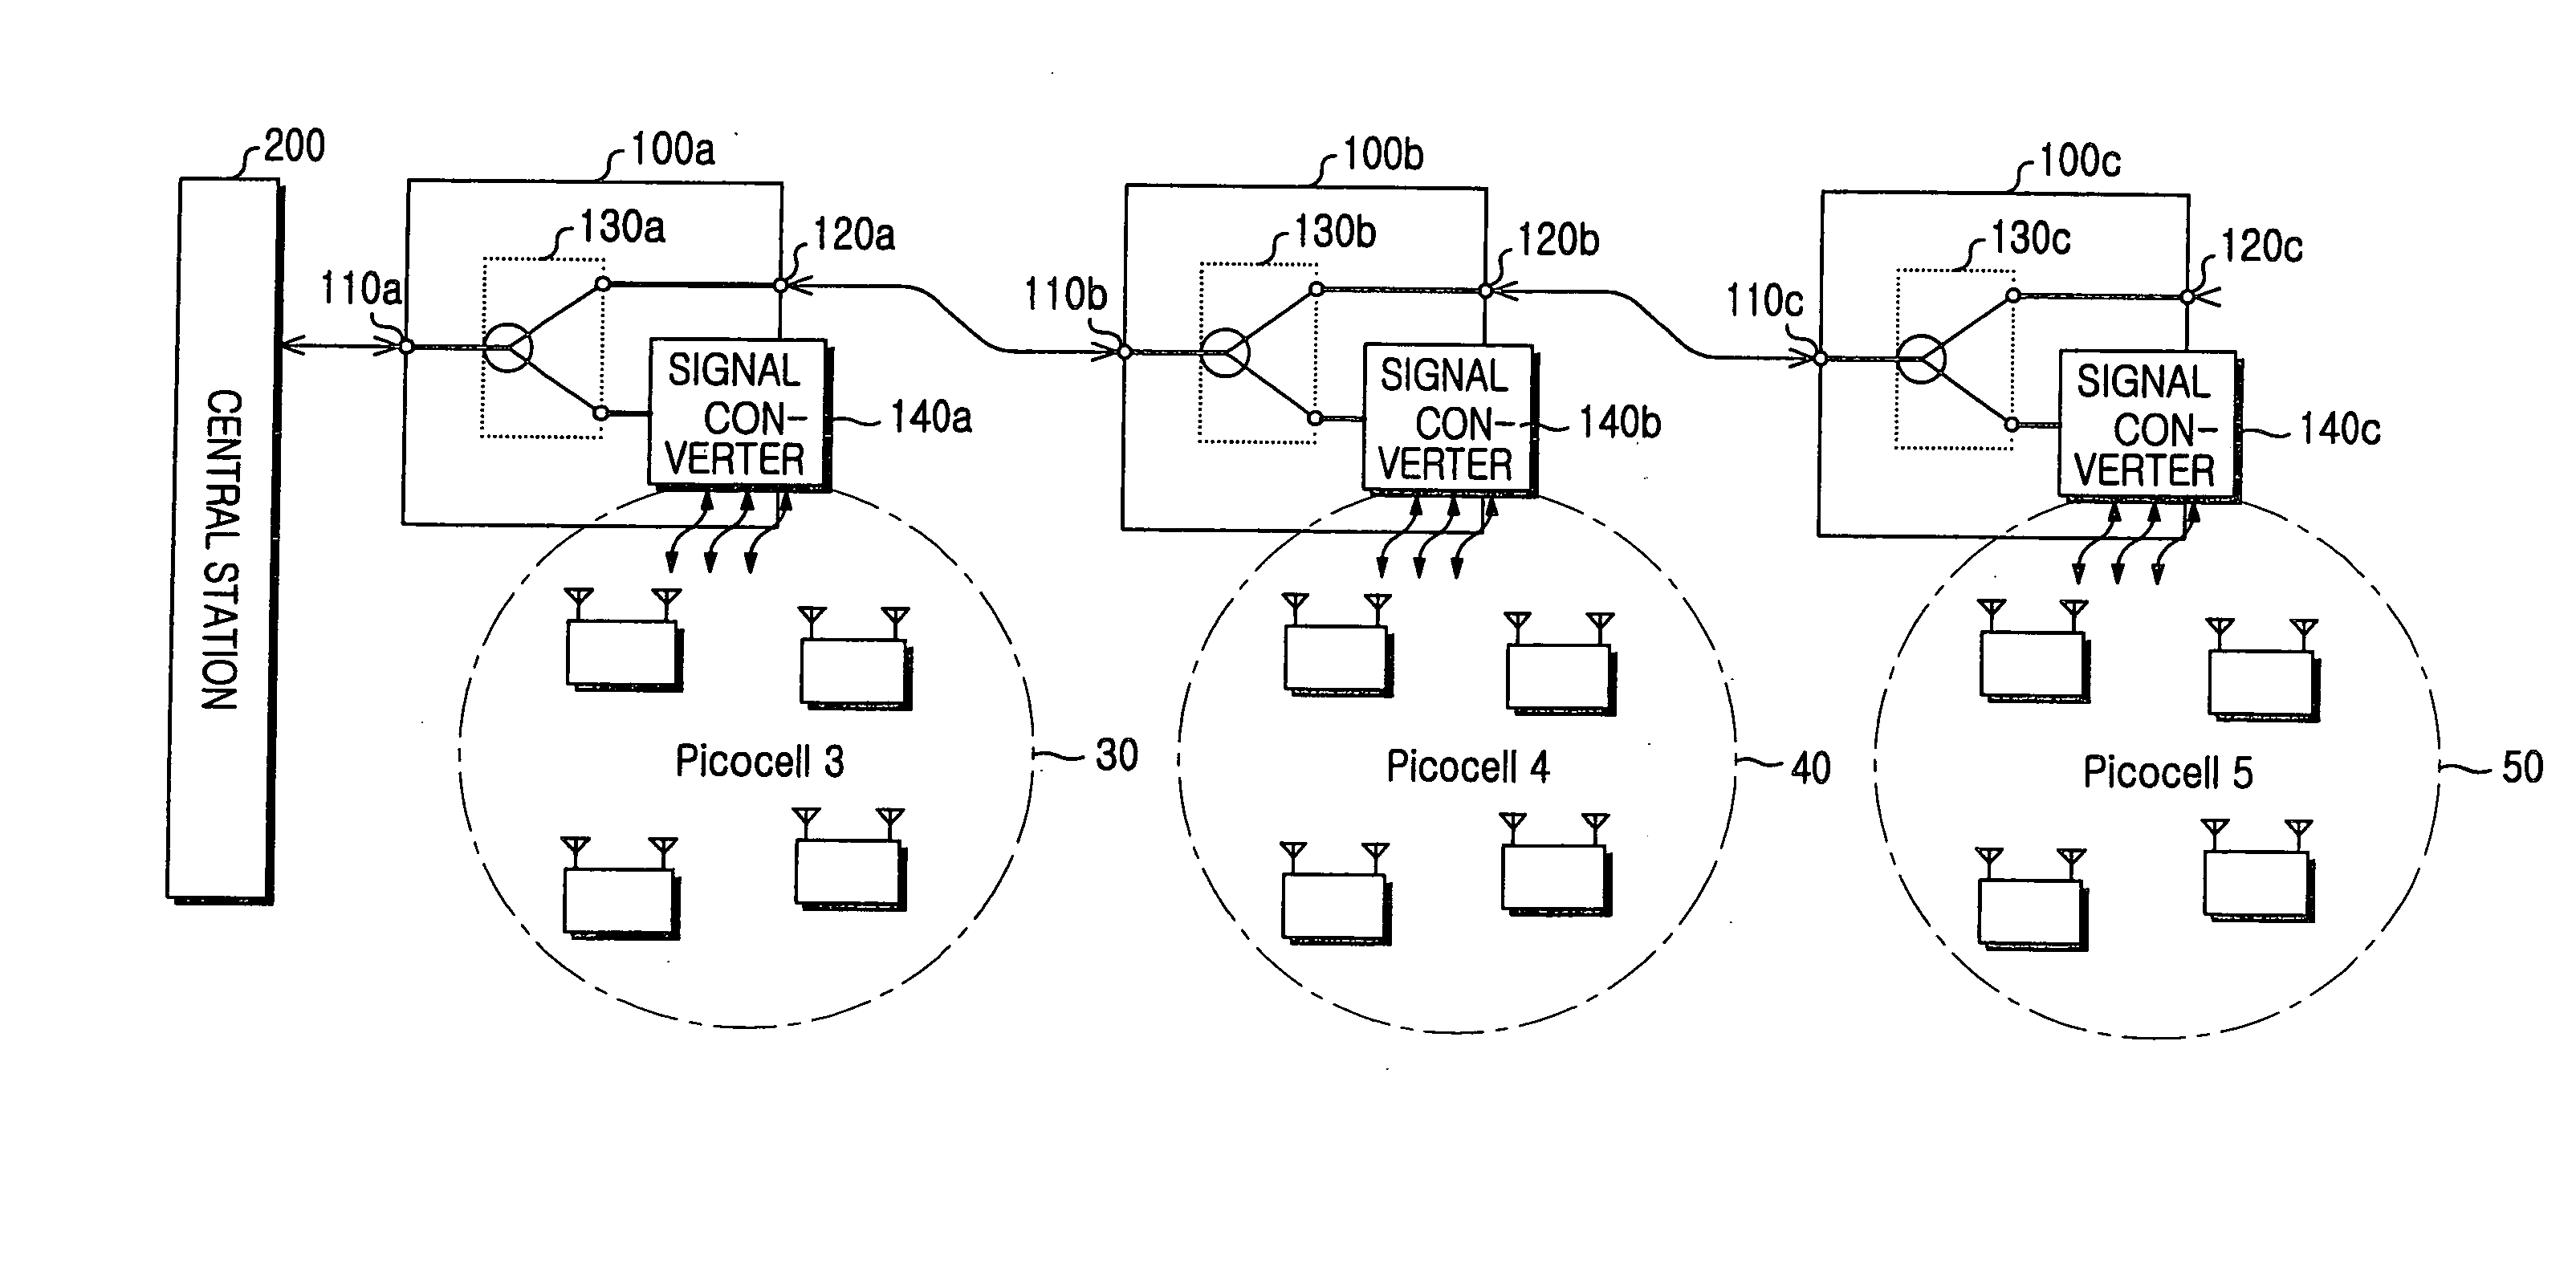 Apparatus for transmitting signals between ultra wideband networks